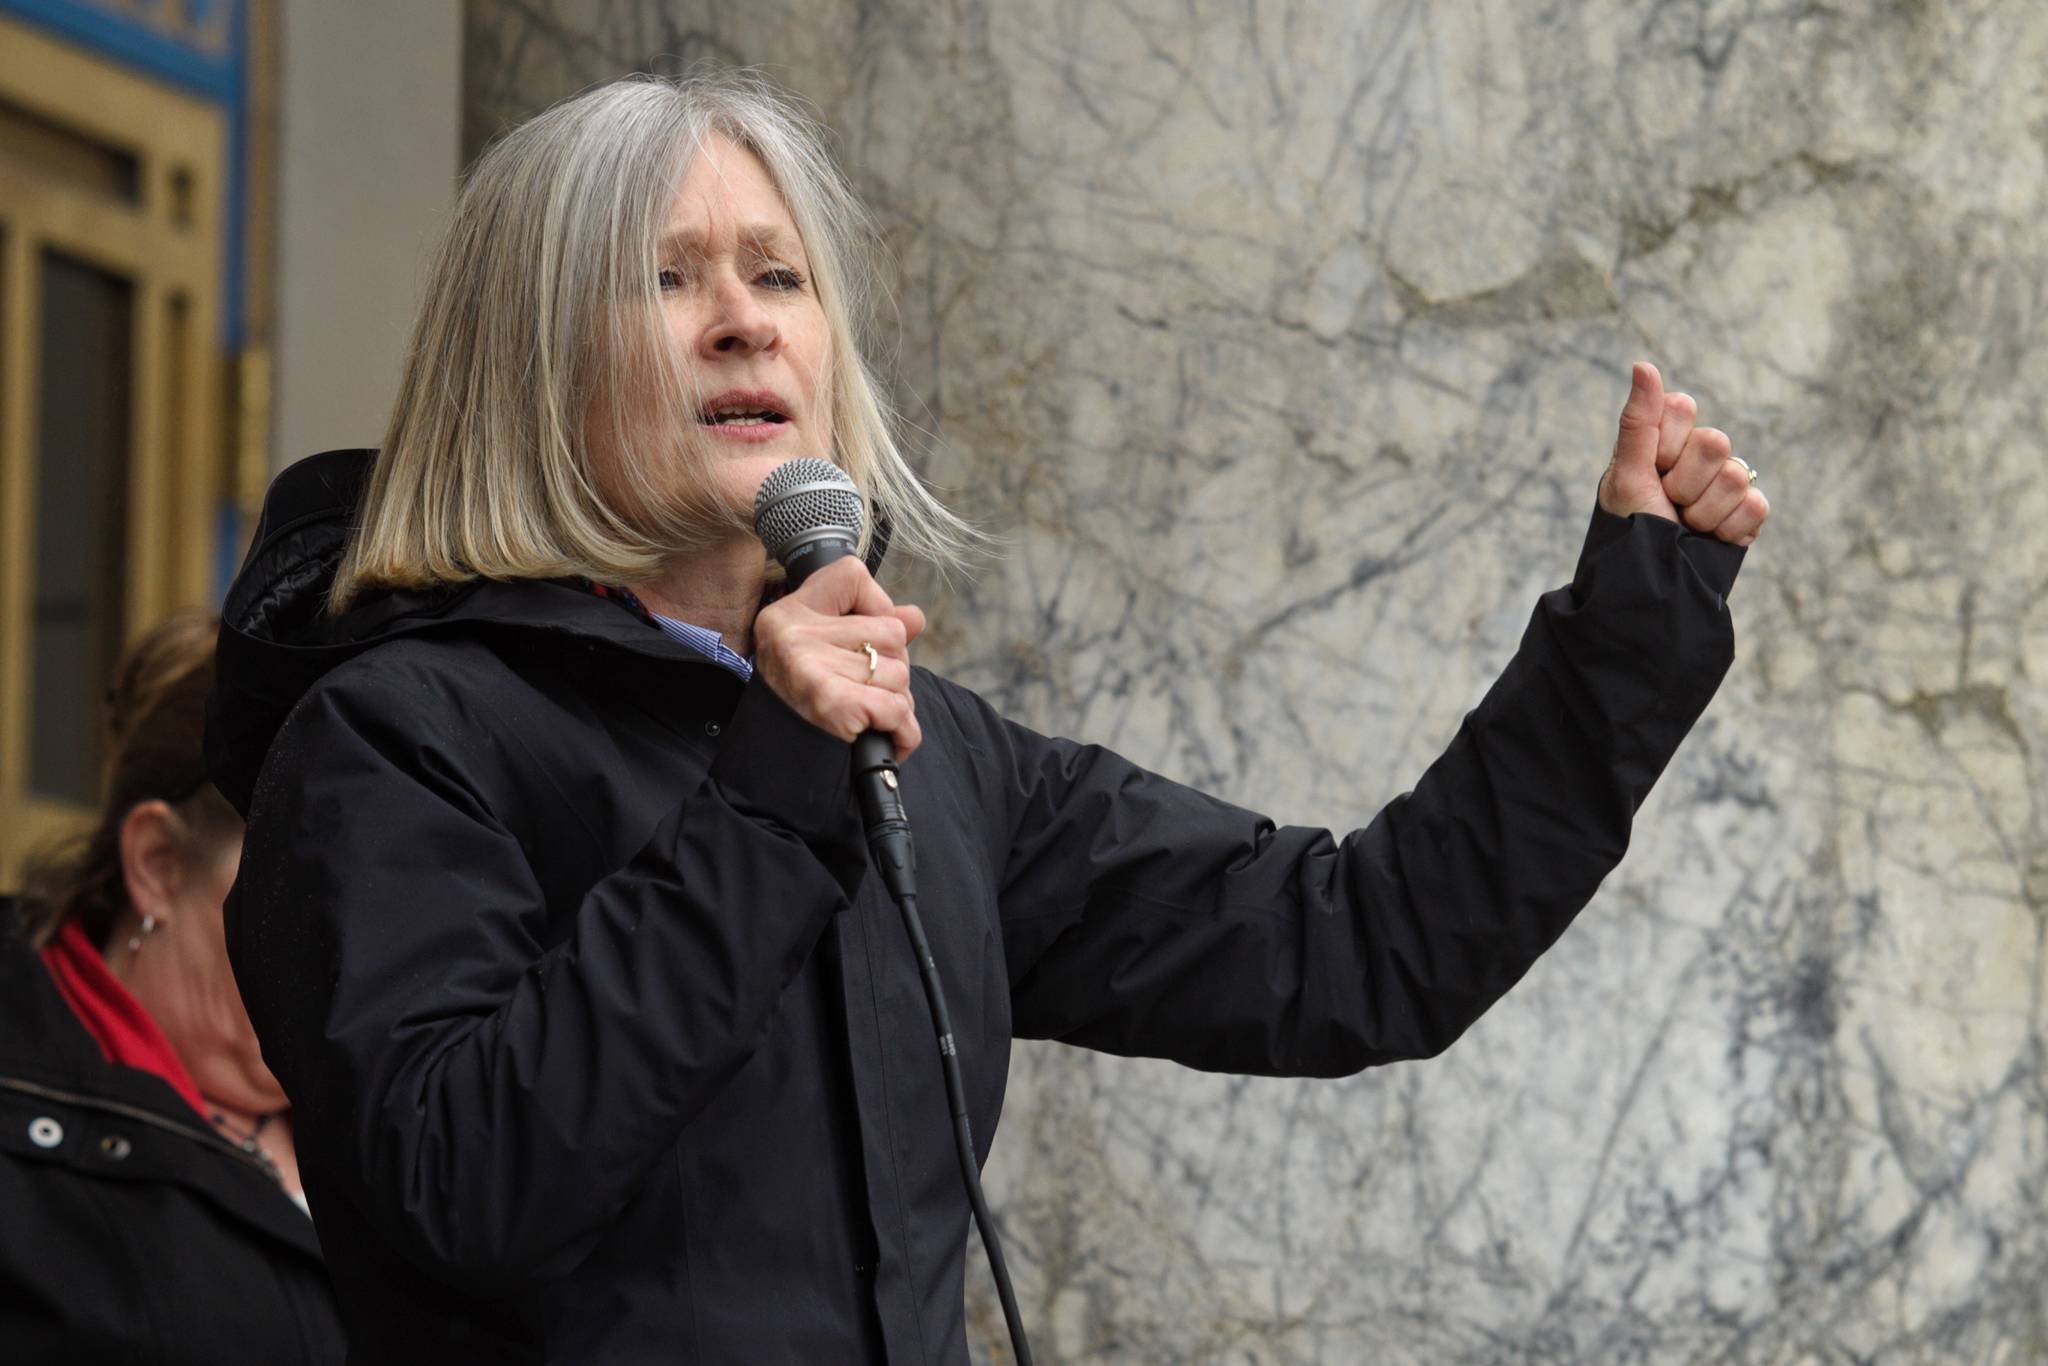 Rep. Andi Story, D-Juneau, speaks in favor of the Alaska Marine Highway System during an SOS rally at the Alaska State Capitol on Tuesday, May 7, 2019. (Michael Penn | Juneau Empire)